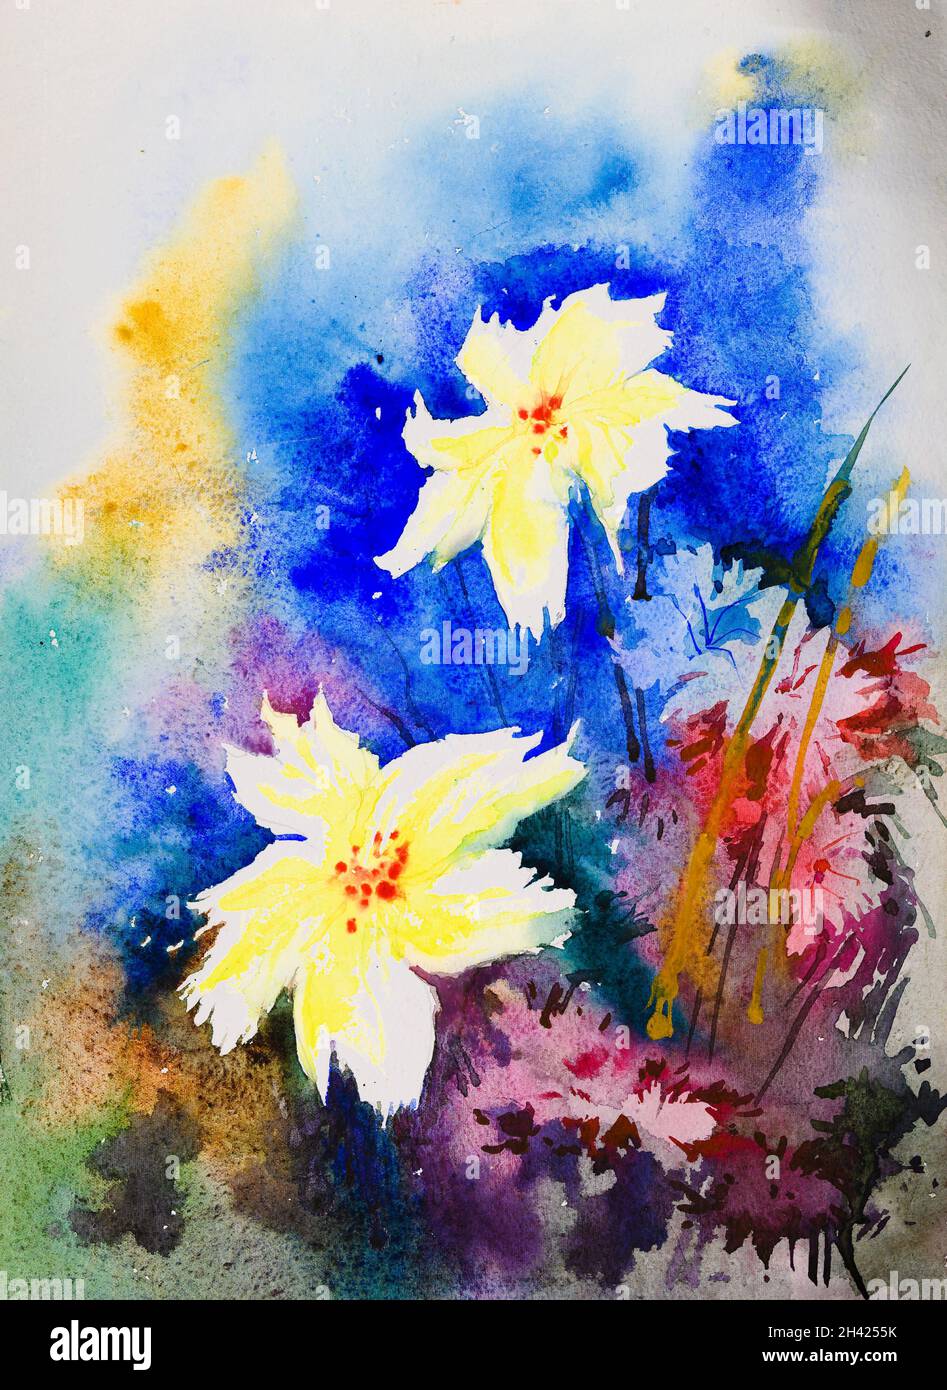 Abstract flower watercolor painting for various usage like invitation card, post card, poster, cover, decoration. Watercolor hand painted illustration Stock Photo